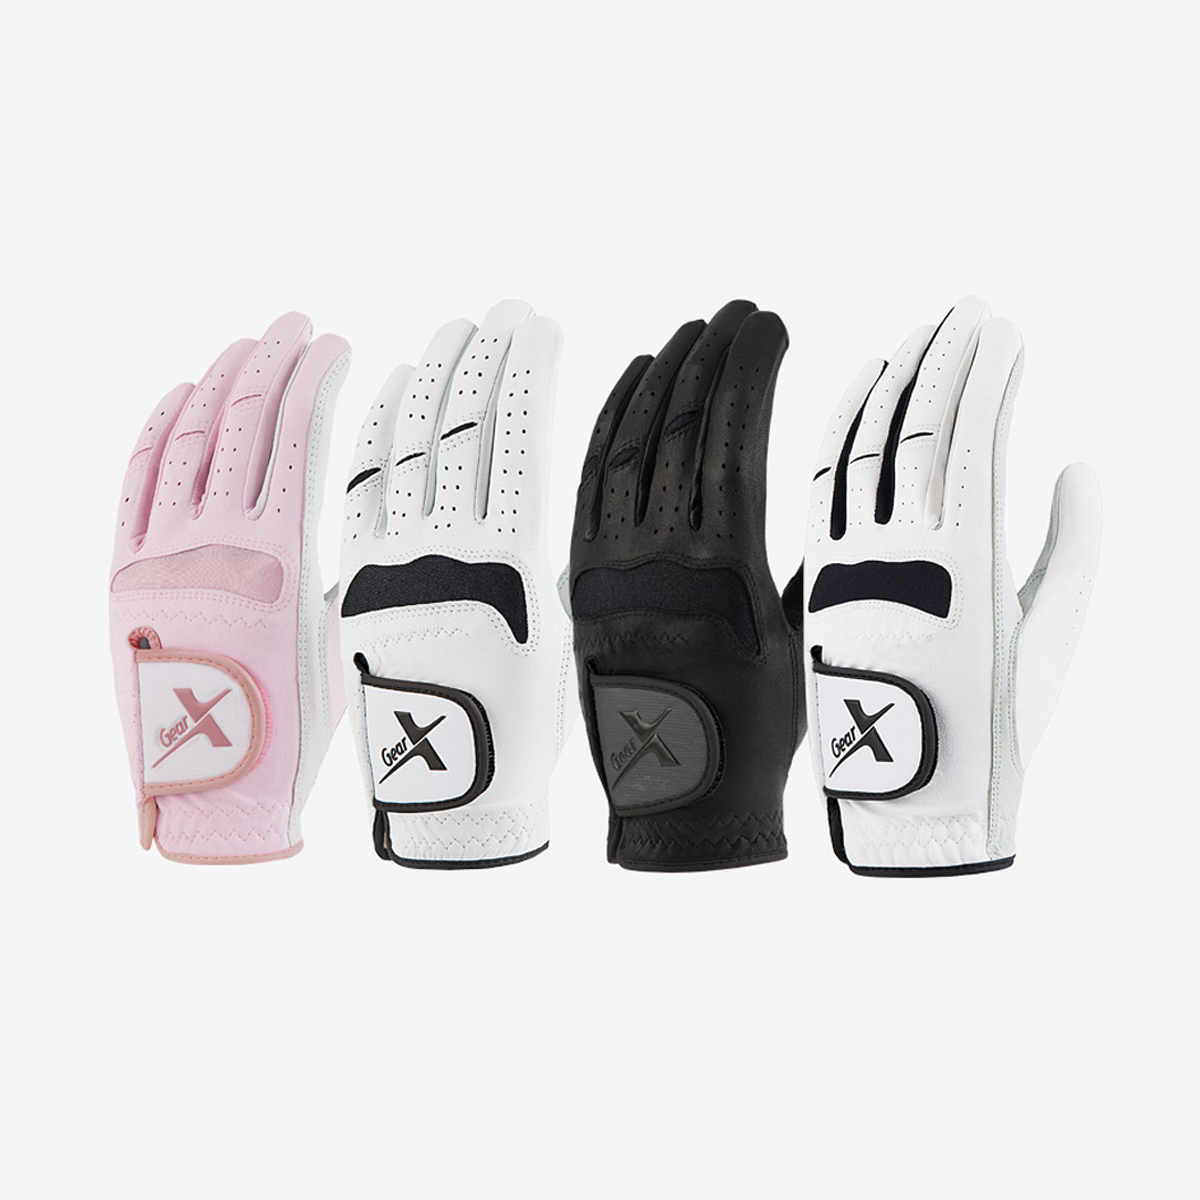 Golf Gloves Made of Natural Sheepskin and Synthetic Leather